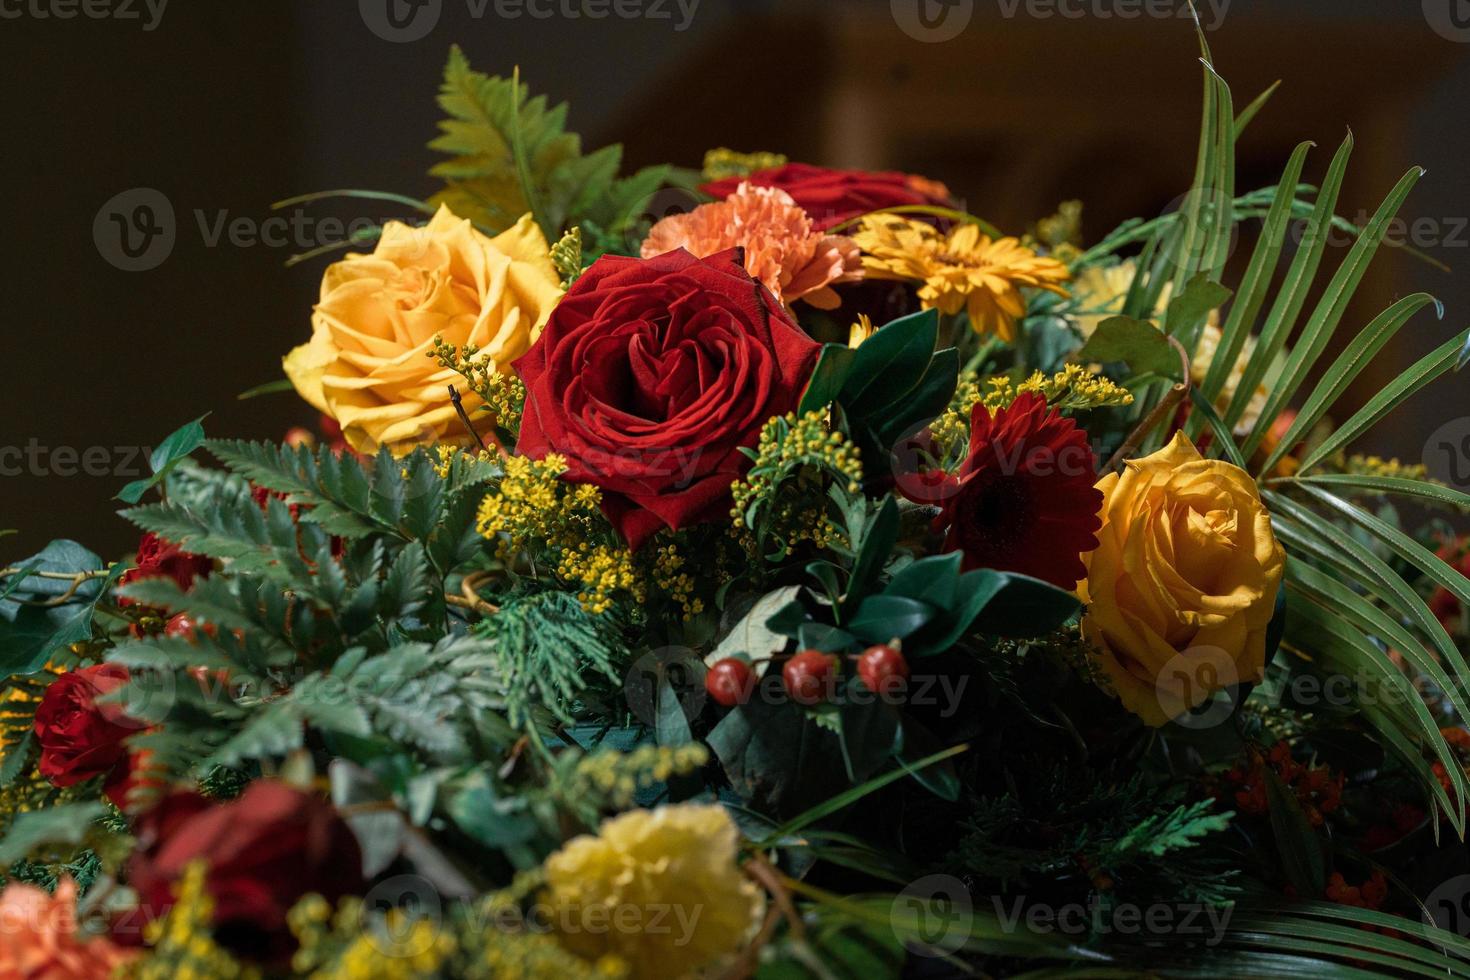 Funeral flowers presented upon a coffin at the event of someone's passing close-up photo